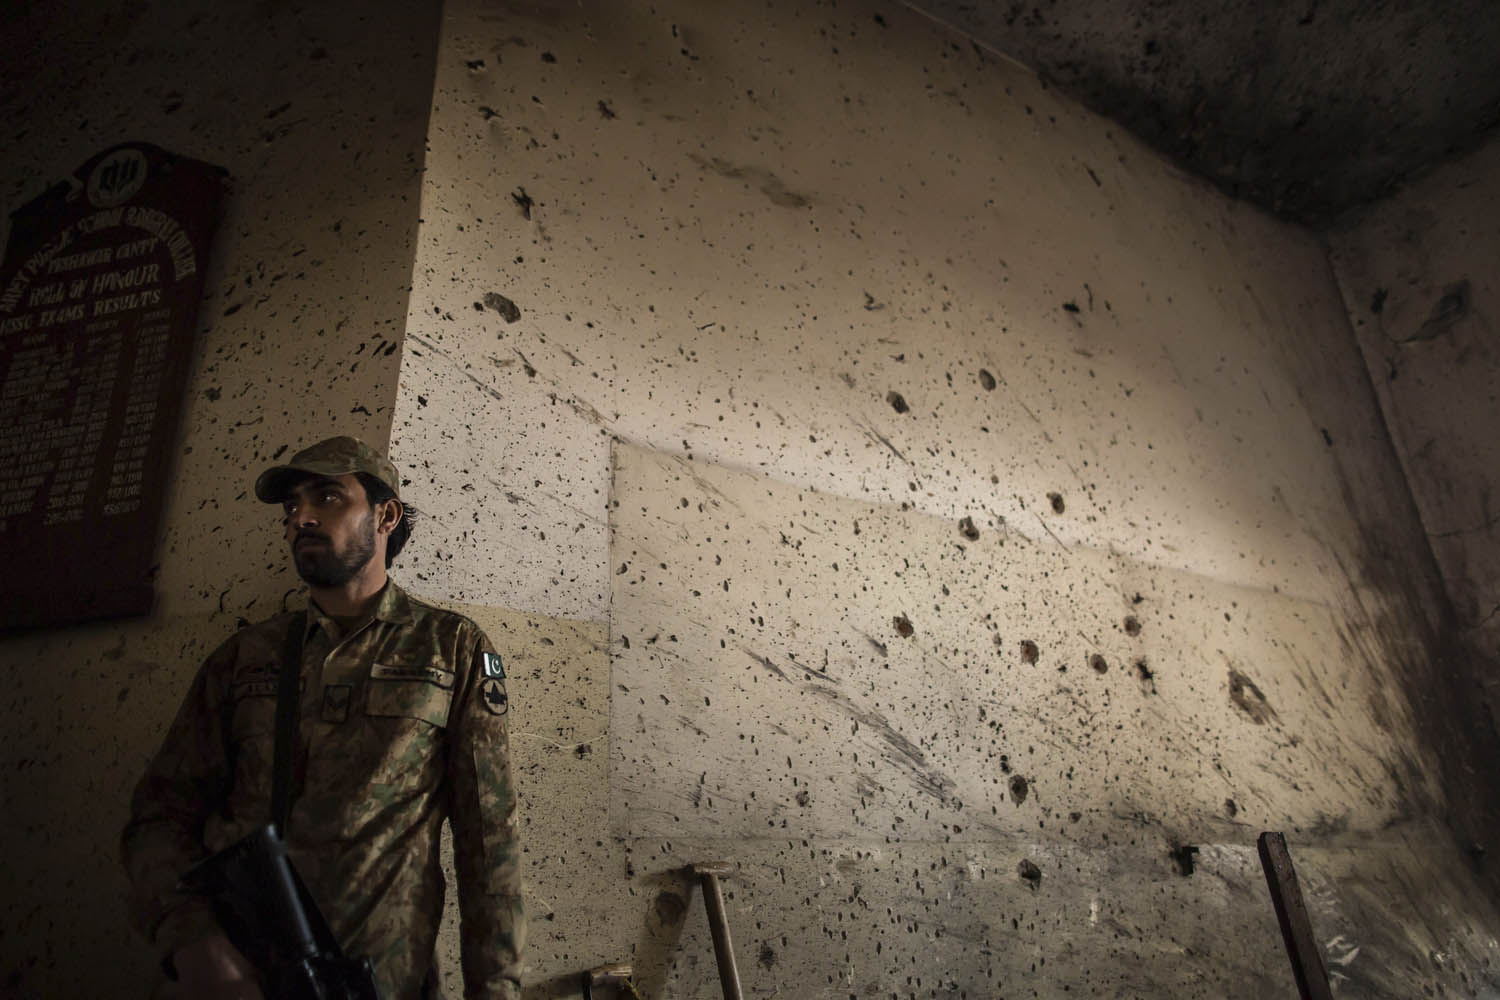 An army soldier stands guard inside the Army Public School, which was attacked by Taliban gunmen earlier this week, in Peshawar, Pakistan, on Dec. 17, 2014 (Zohra Bensemra—Reuters)